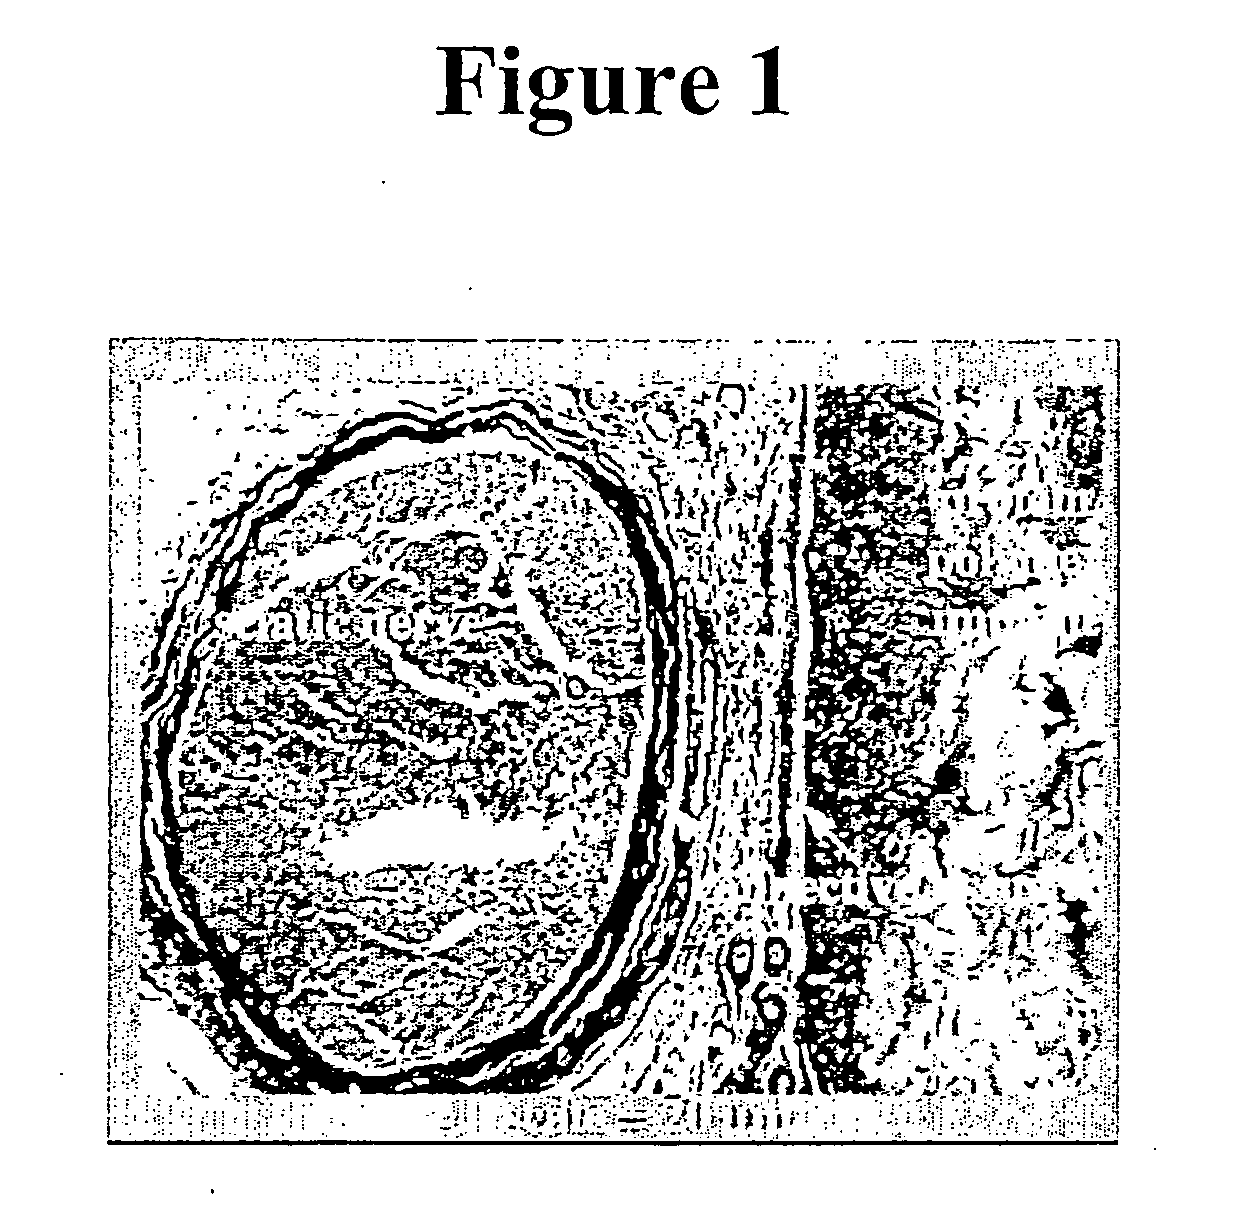 Biomatrix structural containment and fixation systems and methods of use thereof